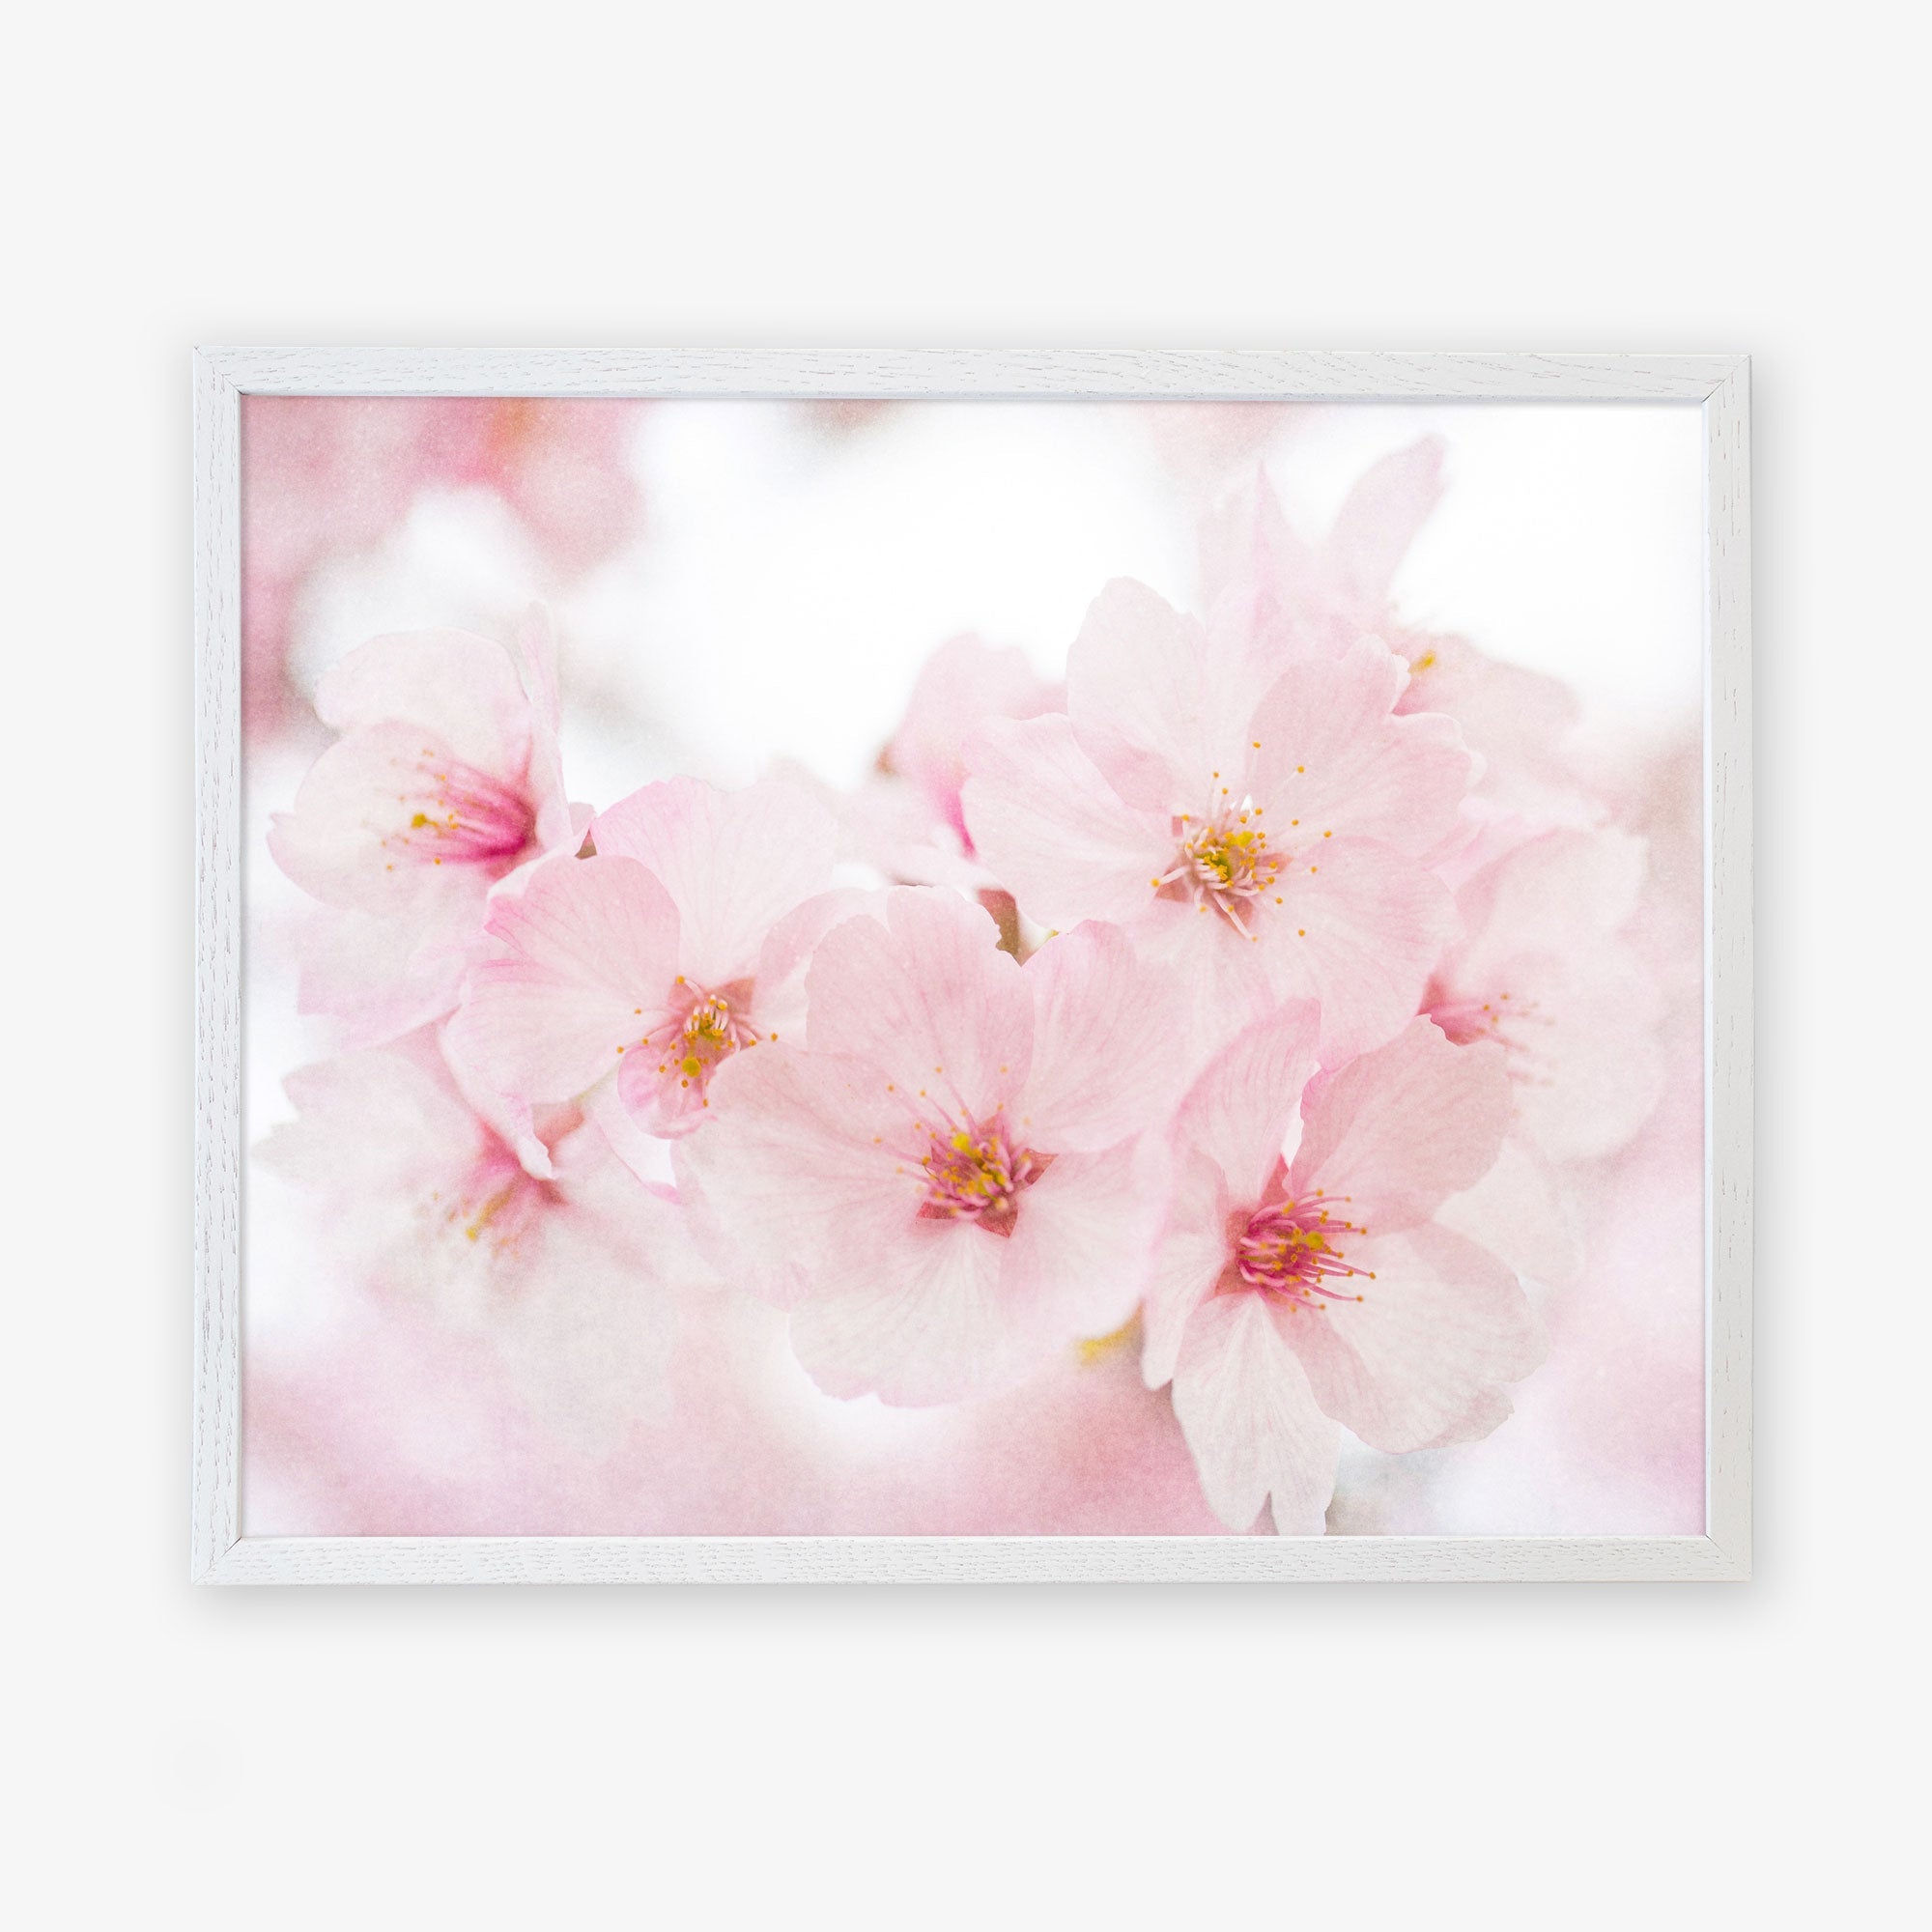 A Pink Flower Print, &#39;Cherry Blossom&#39; framed art print by Offley Green featuring soft pink cherry blossoms with a delicate, dreamy pink background, reproduced on archival photographic paper and displayed in a simple white frame.